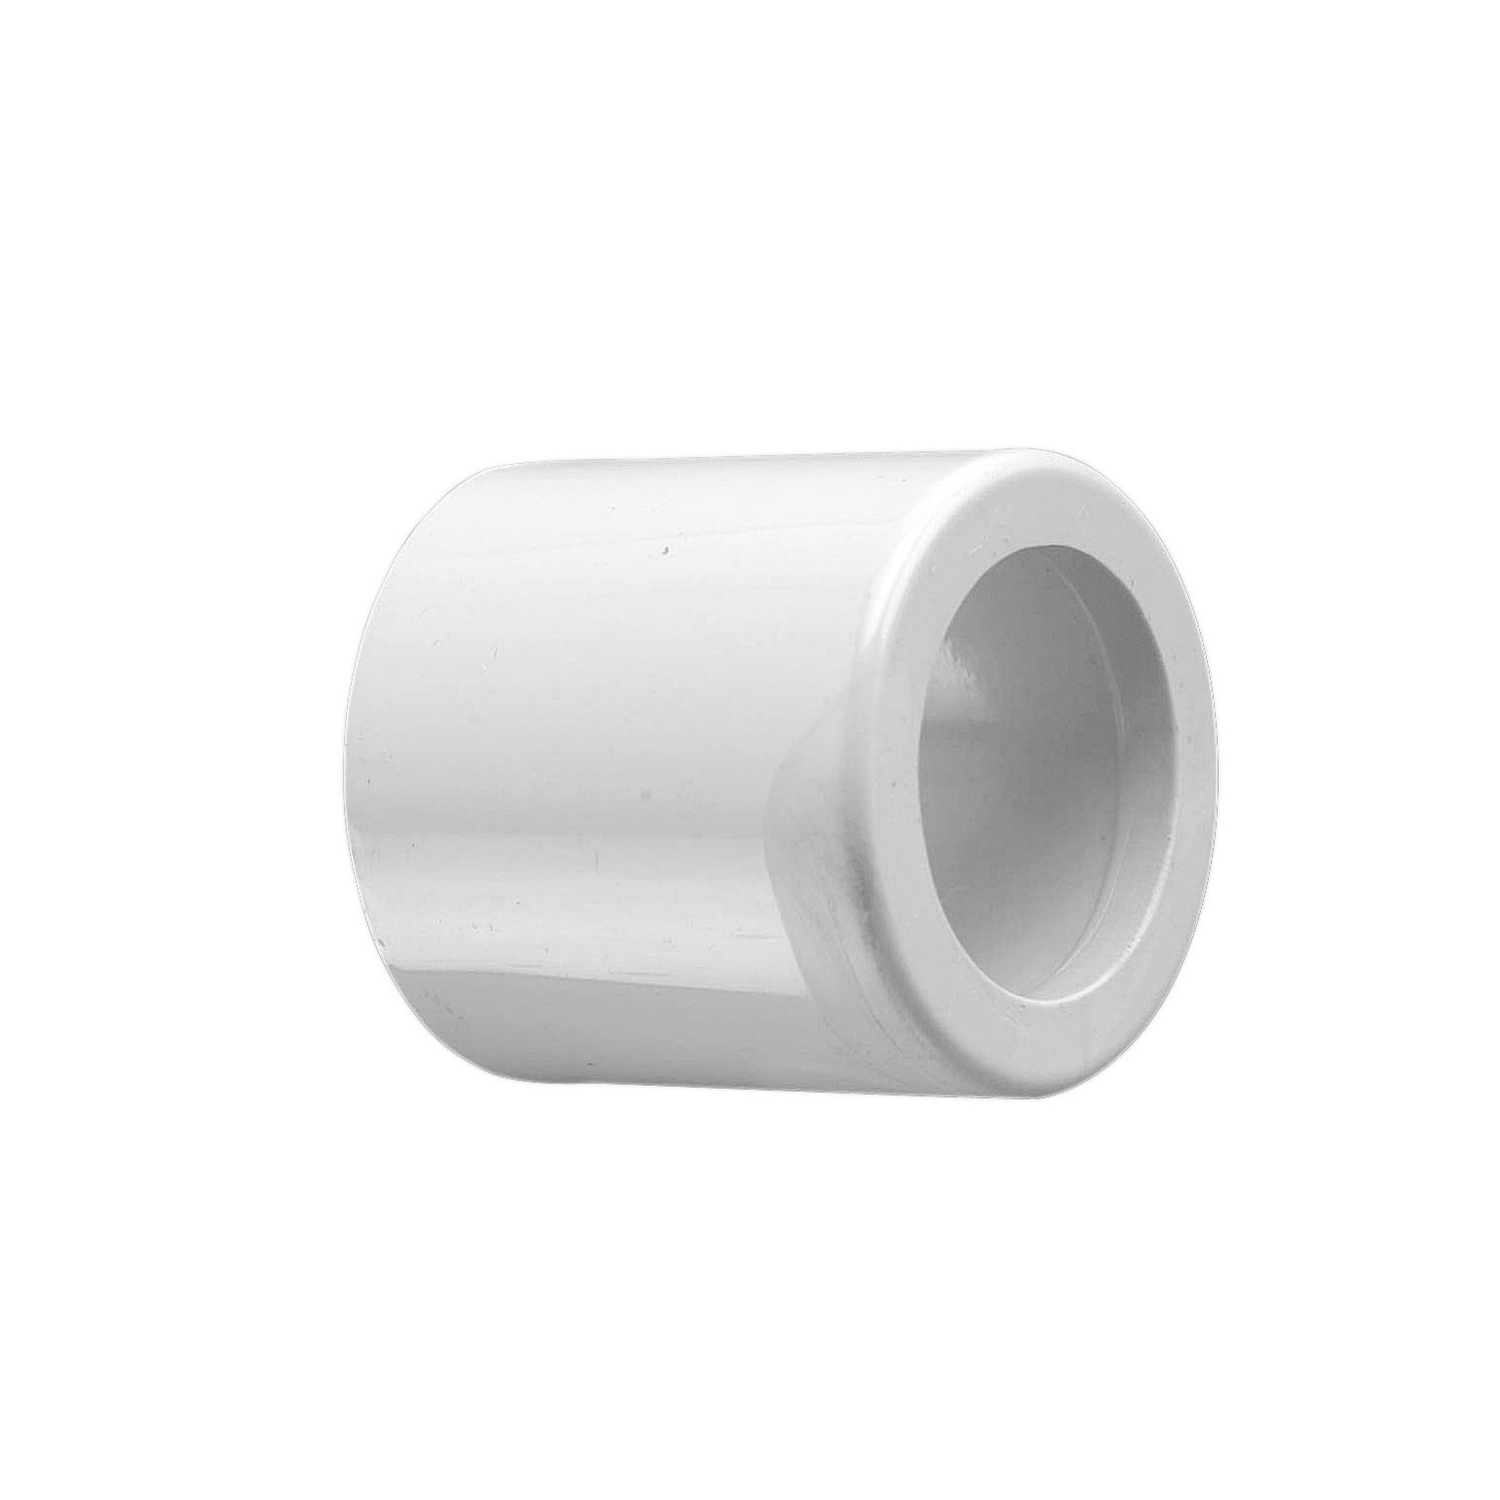 Solid Fittings - PVC, Plain Reducers, 40mm - 32mm, Grey